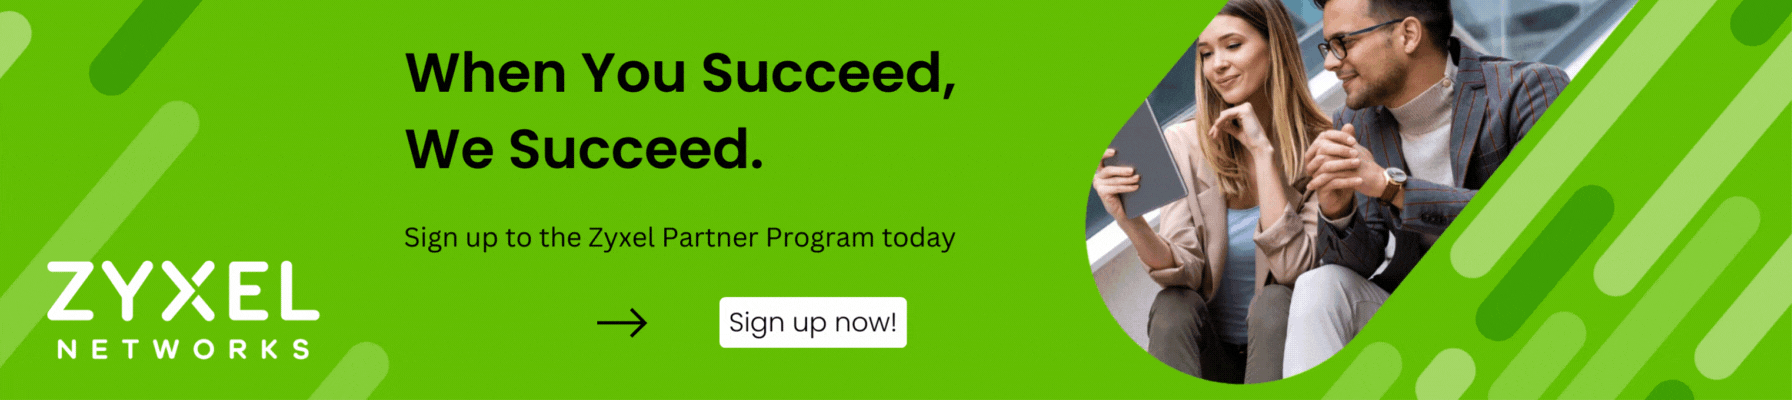 Sign Up to the Zyxel Partner Program